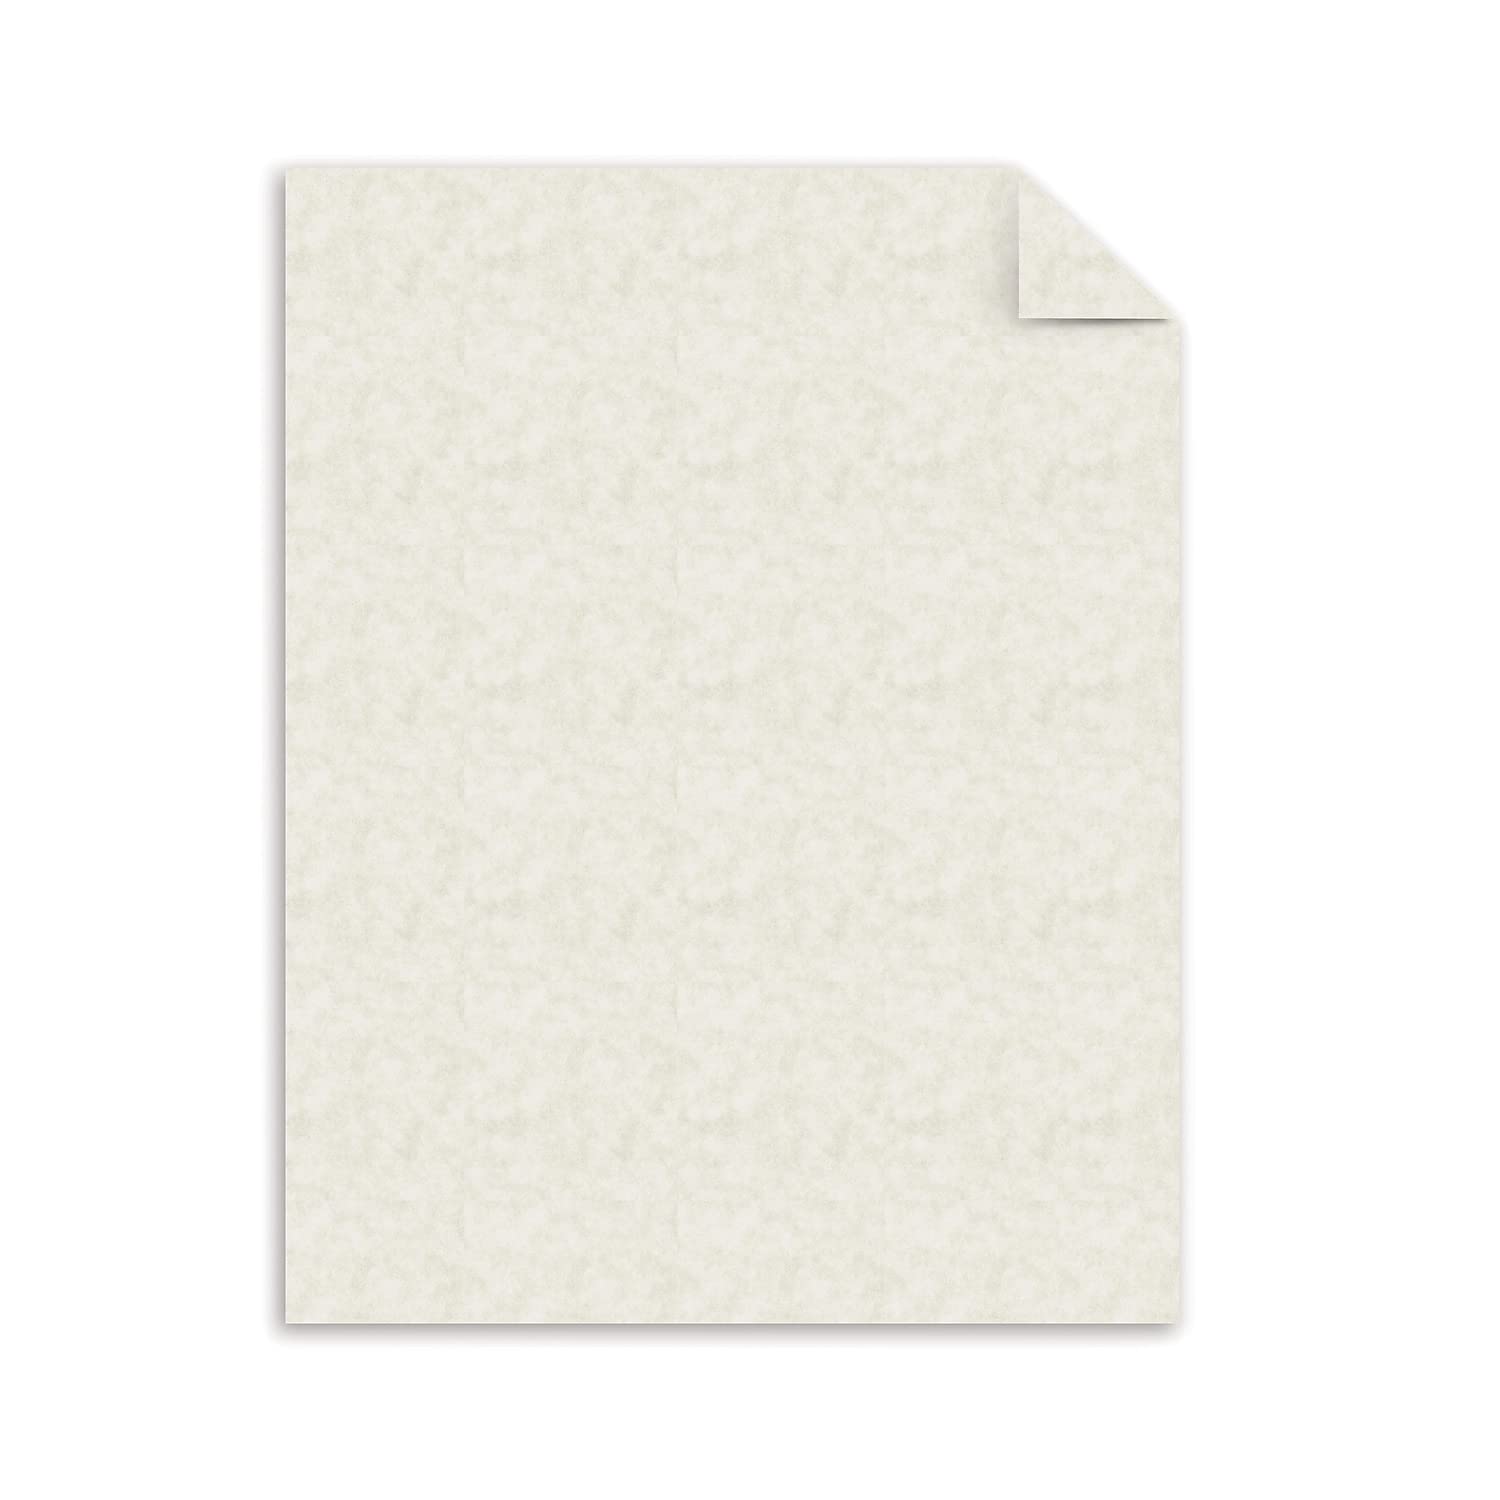 Southworth Parchment Specialty Paper, 24 lb Bond Weight, 8.5 x 11, Ivory, 500/Ream